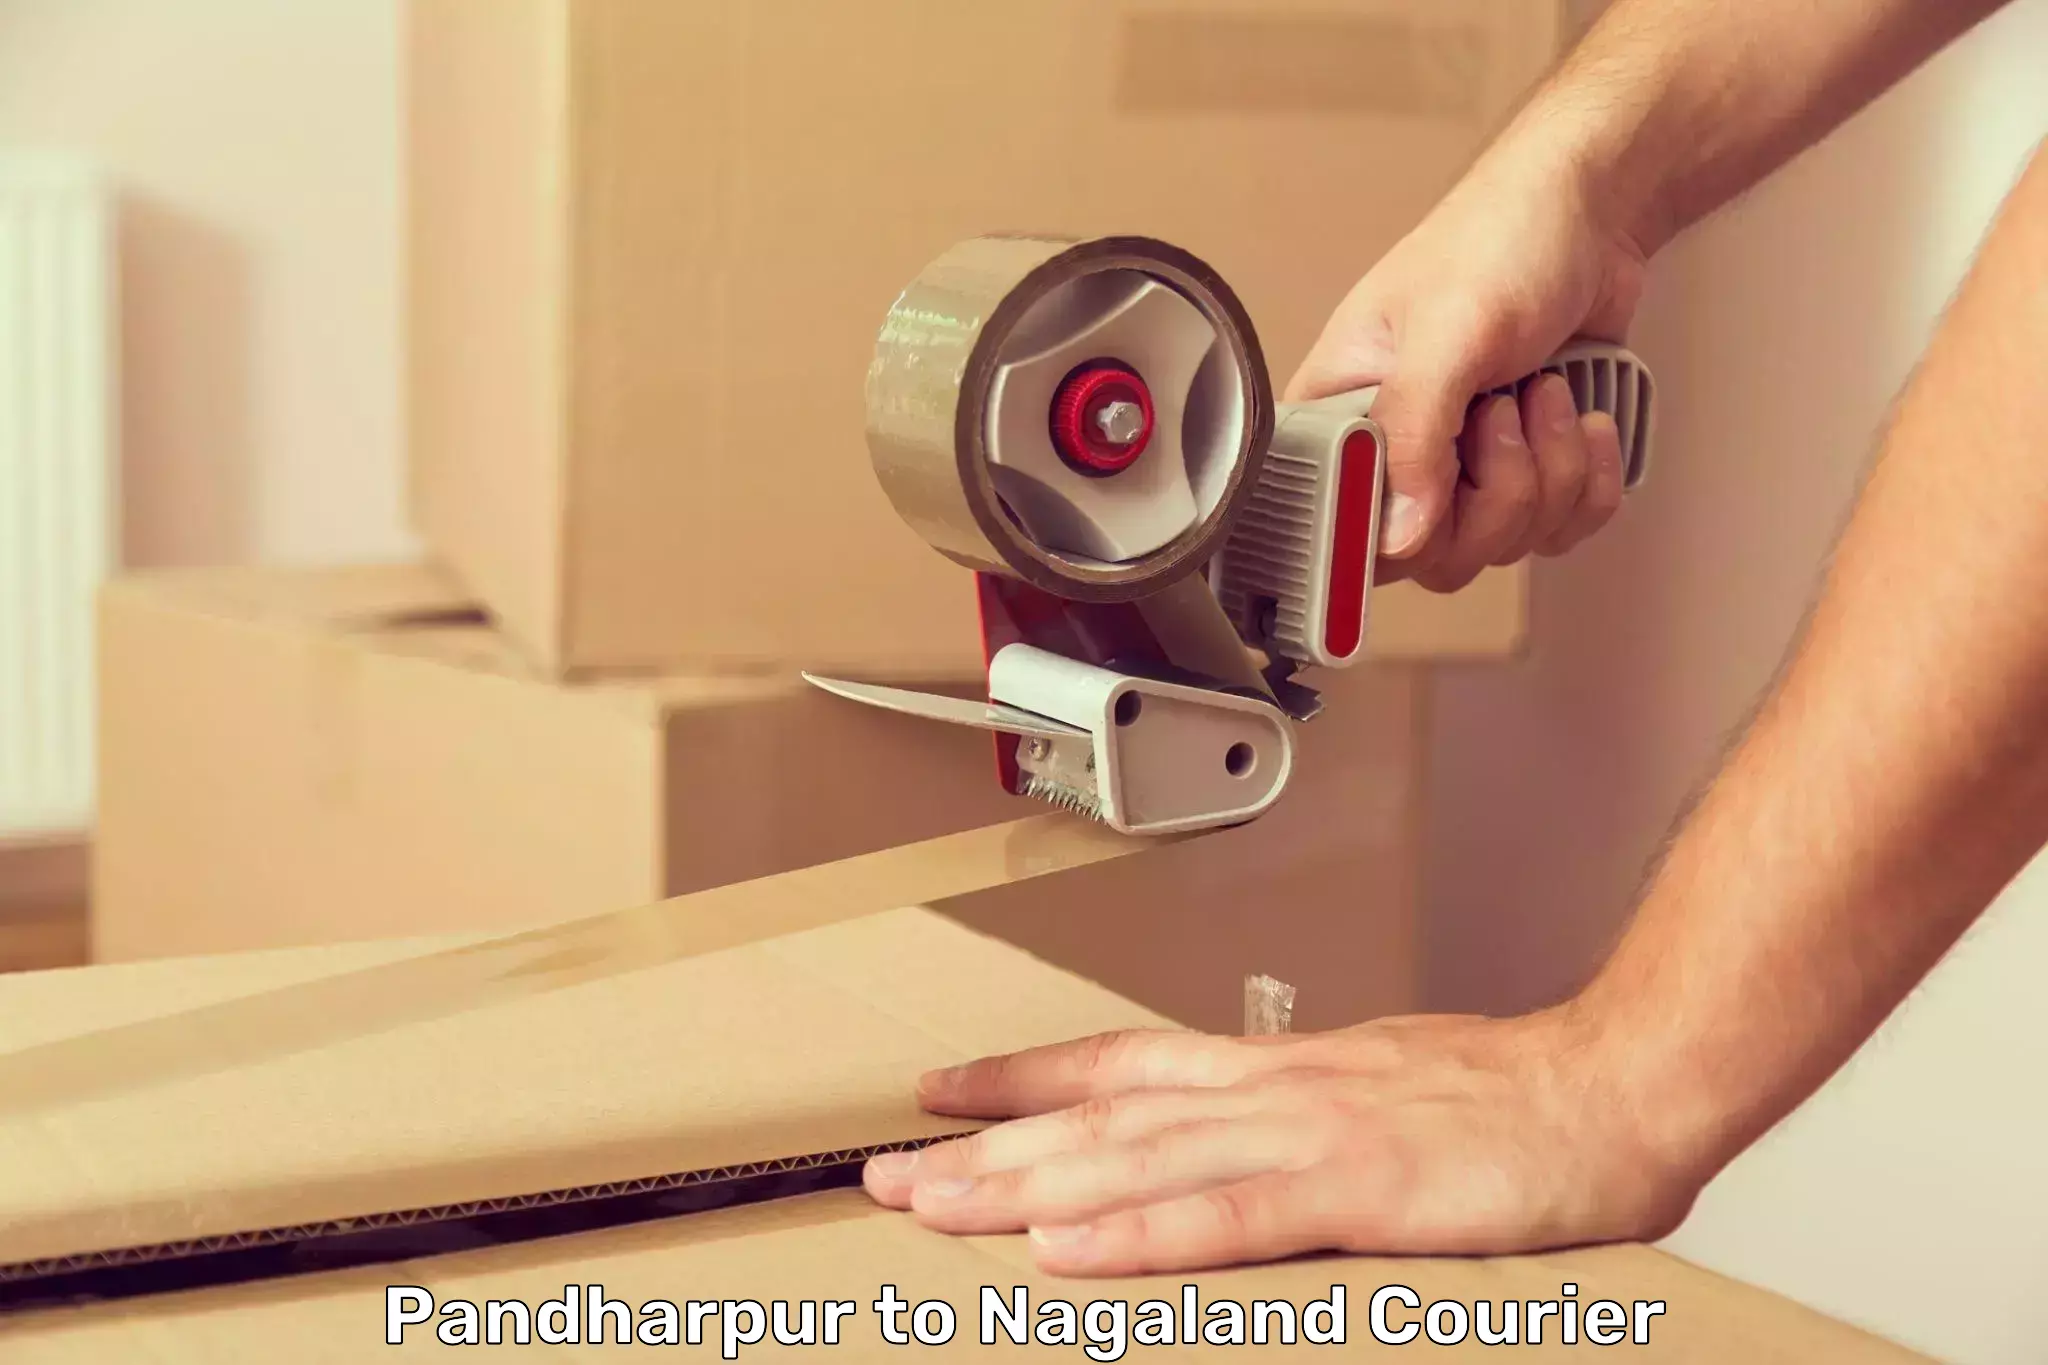 Nationwide courier service Pandharpur to Nagaland